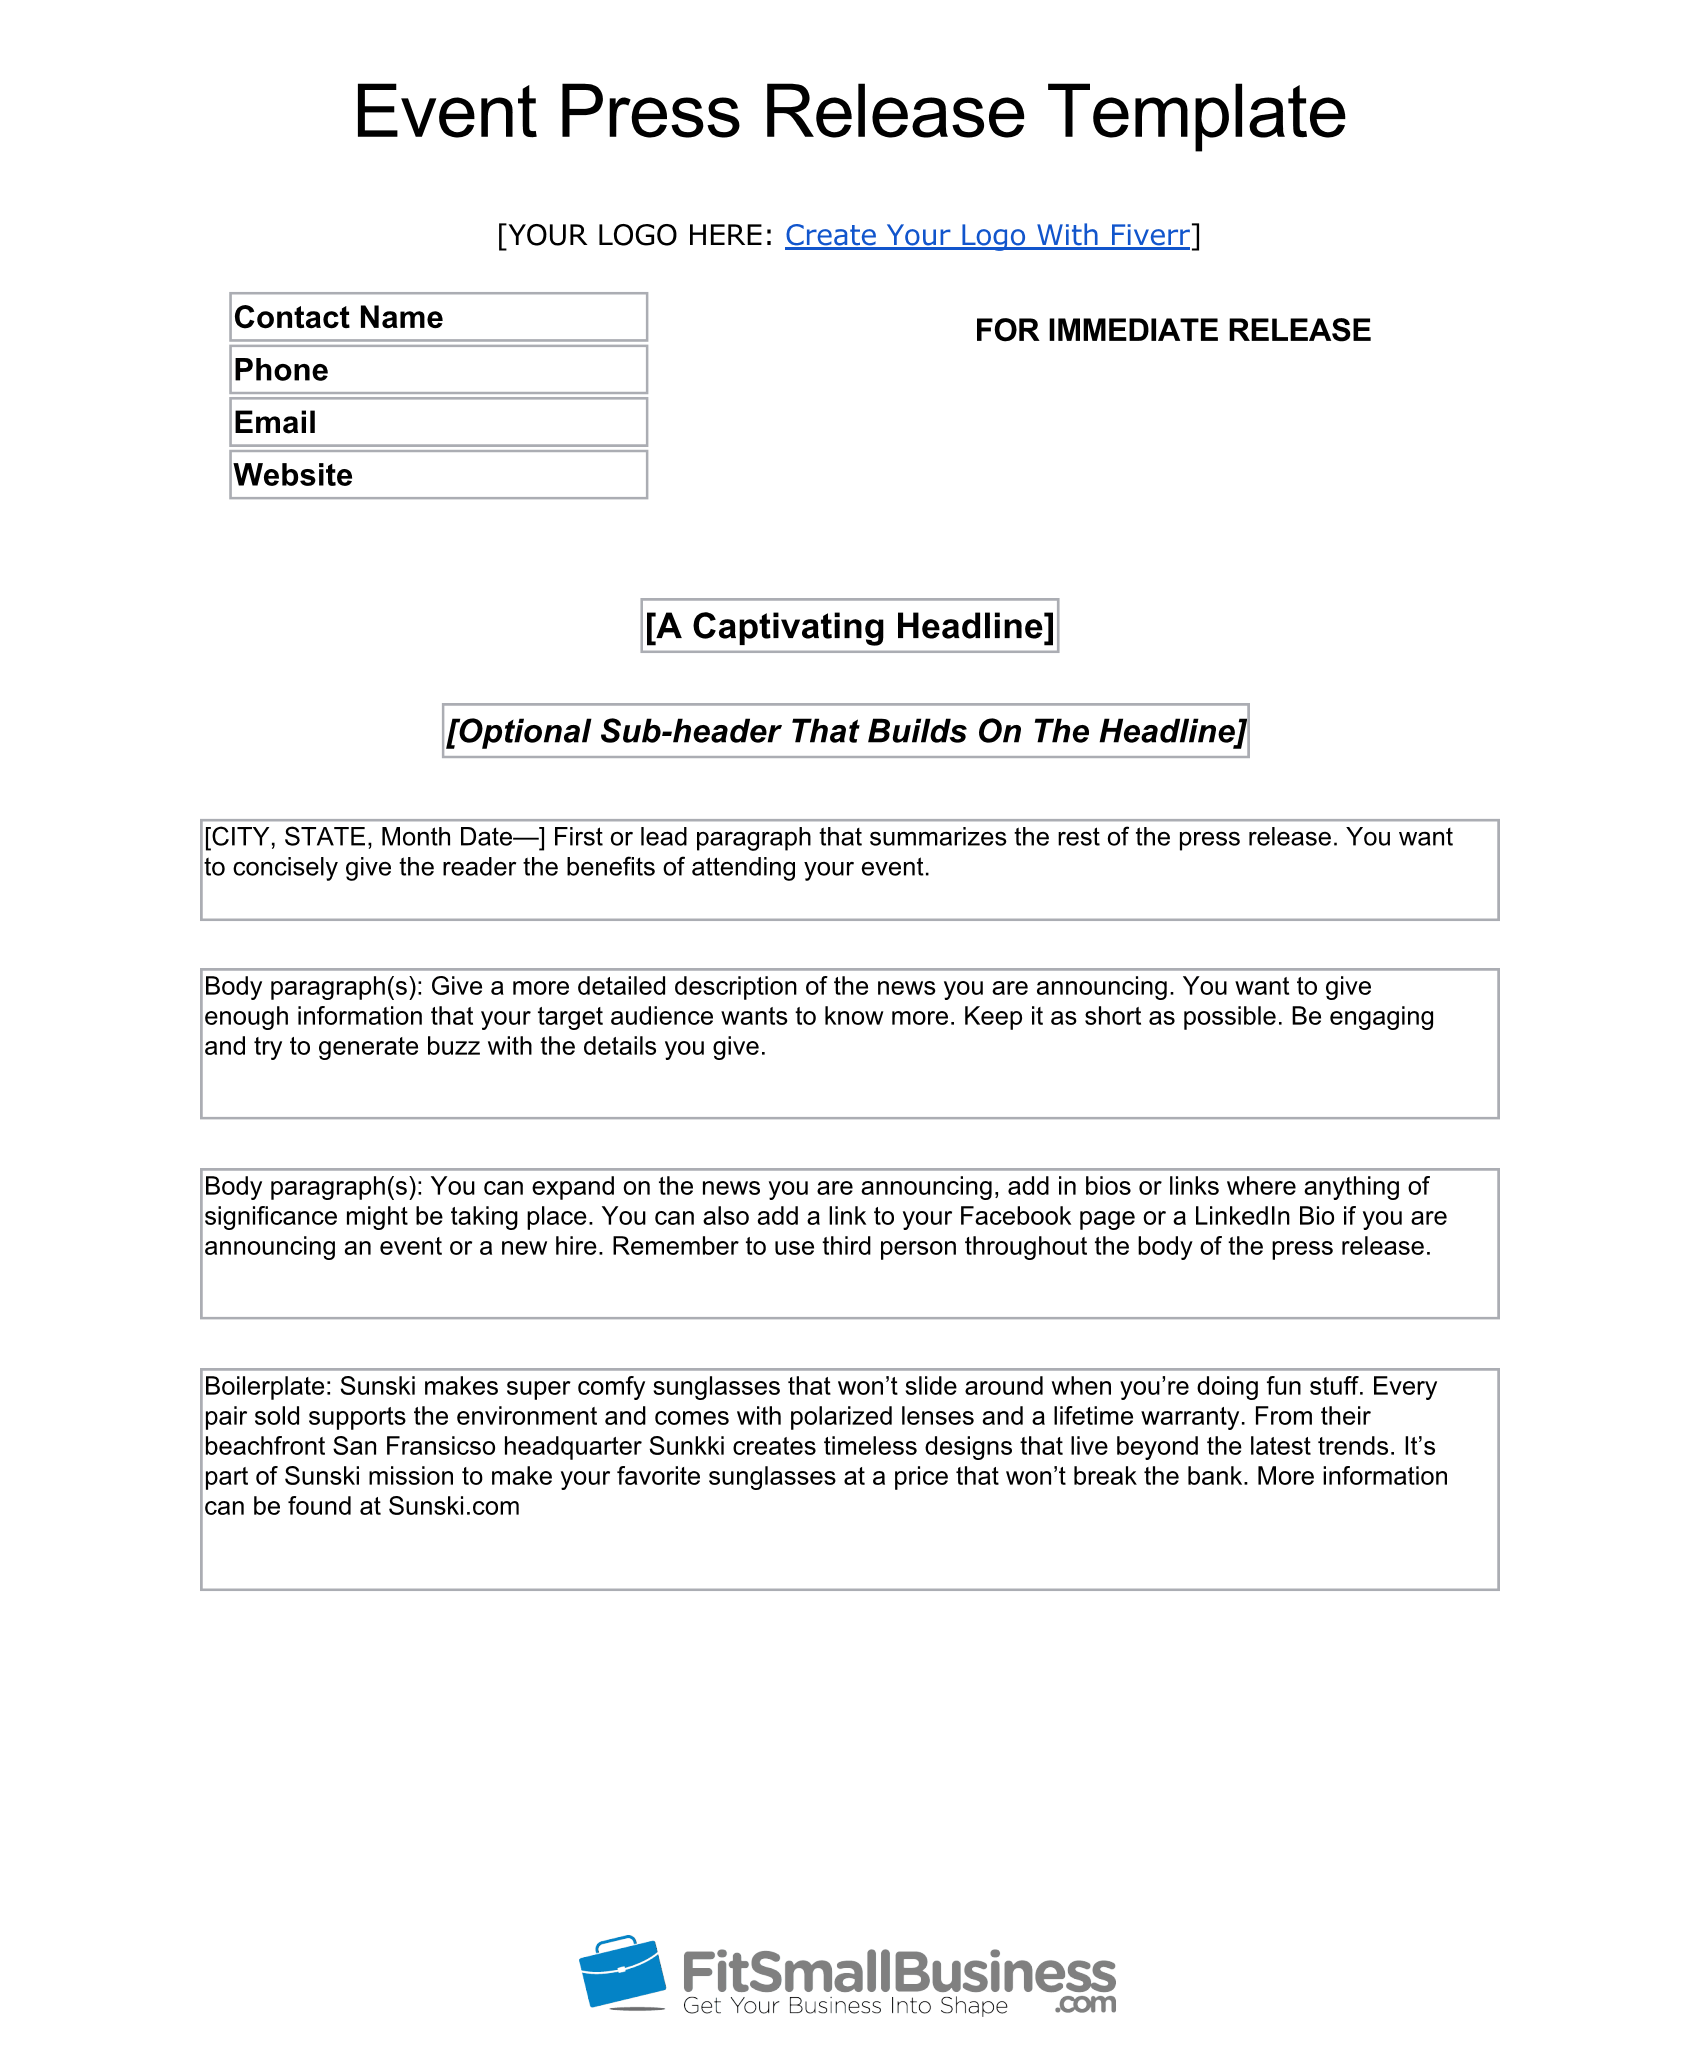 How to Write an AP Style Press Release +[Template]